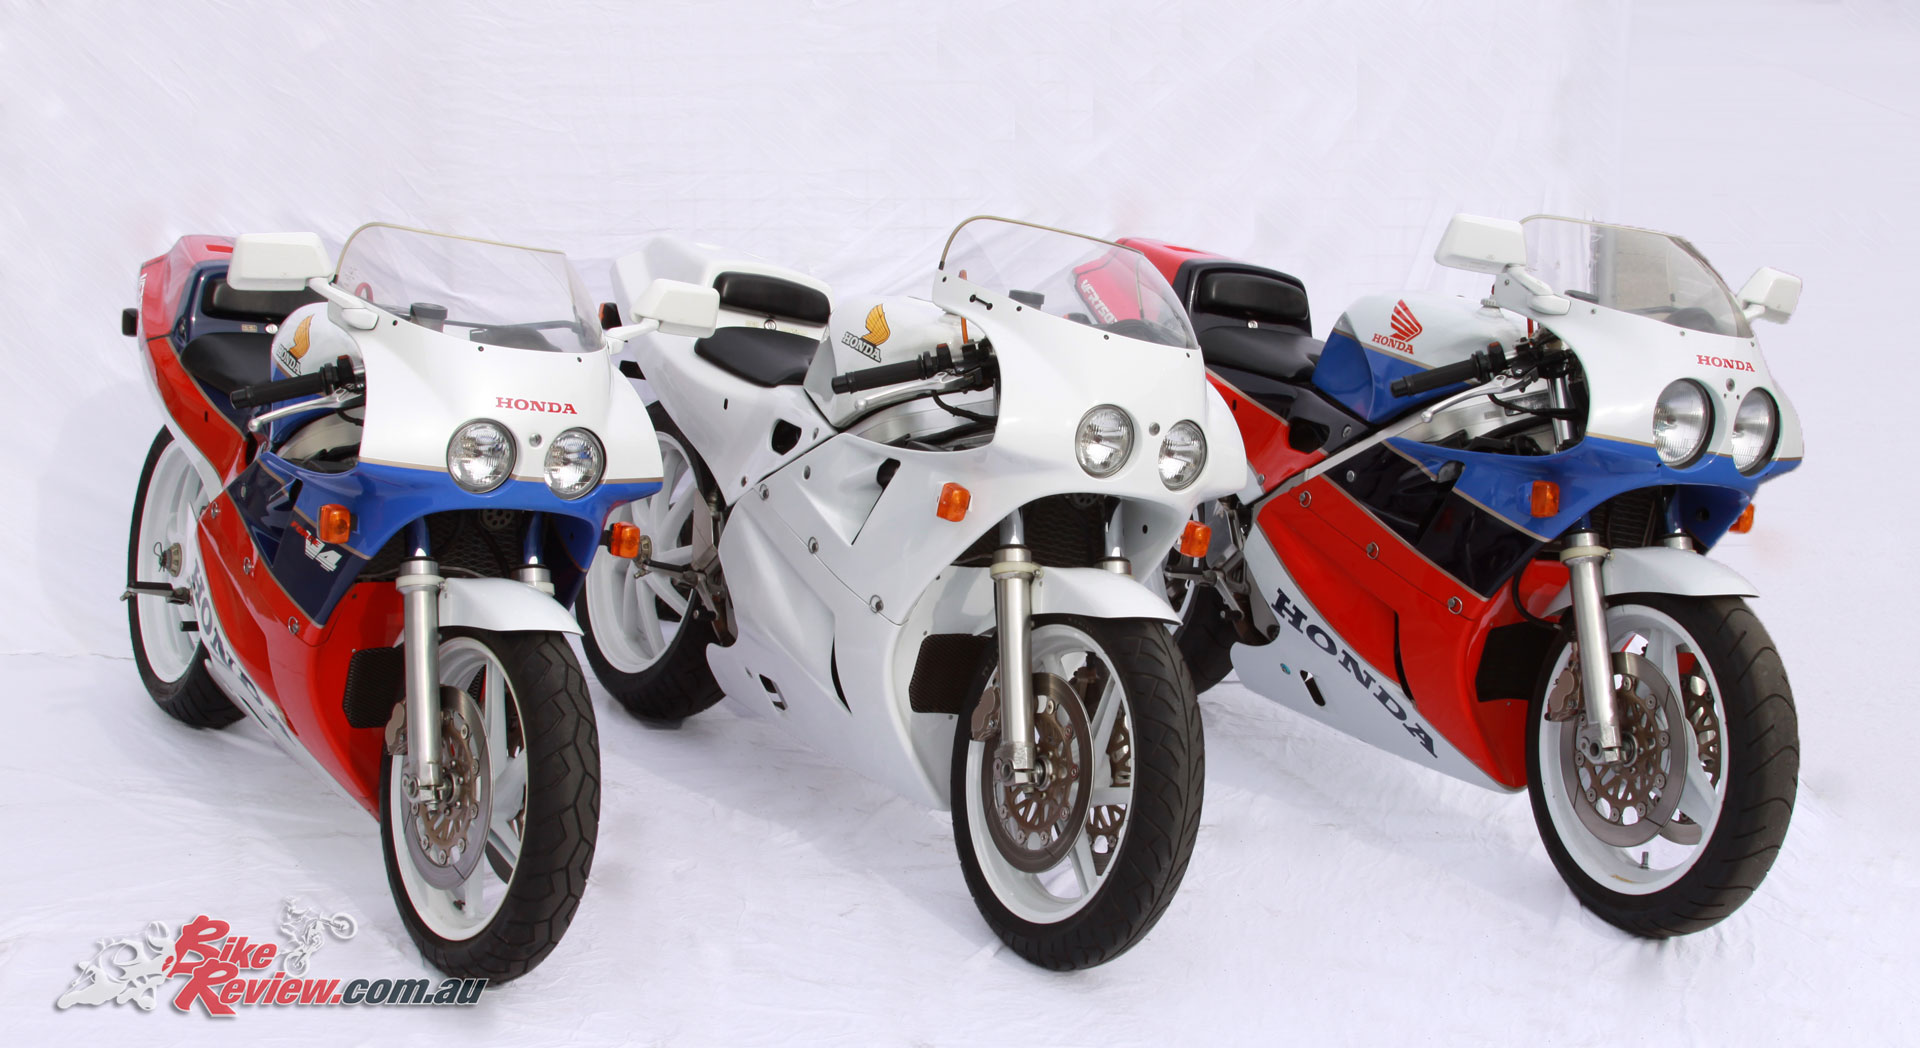 These VFR750R RC30s are part of a private collection, check out motogallur.com to see more of the motorcycles in the collection